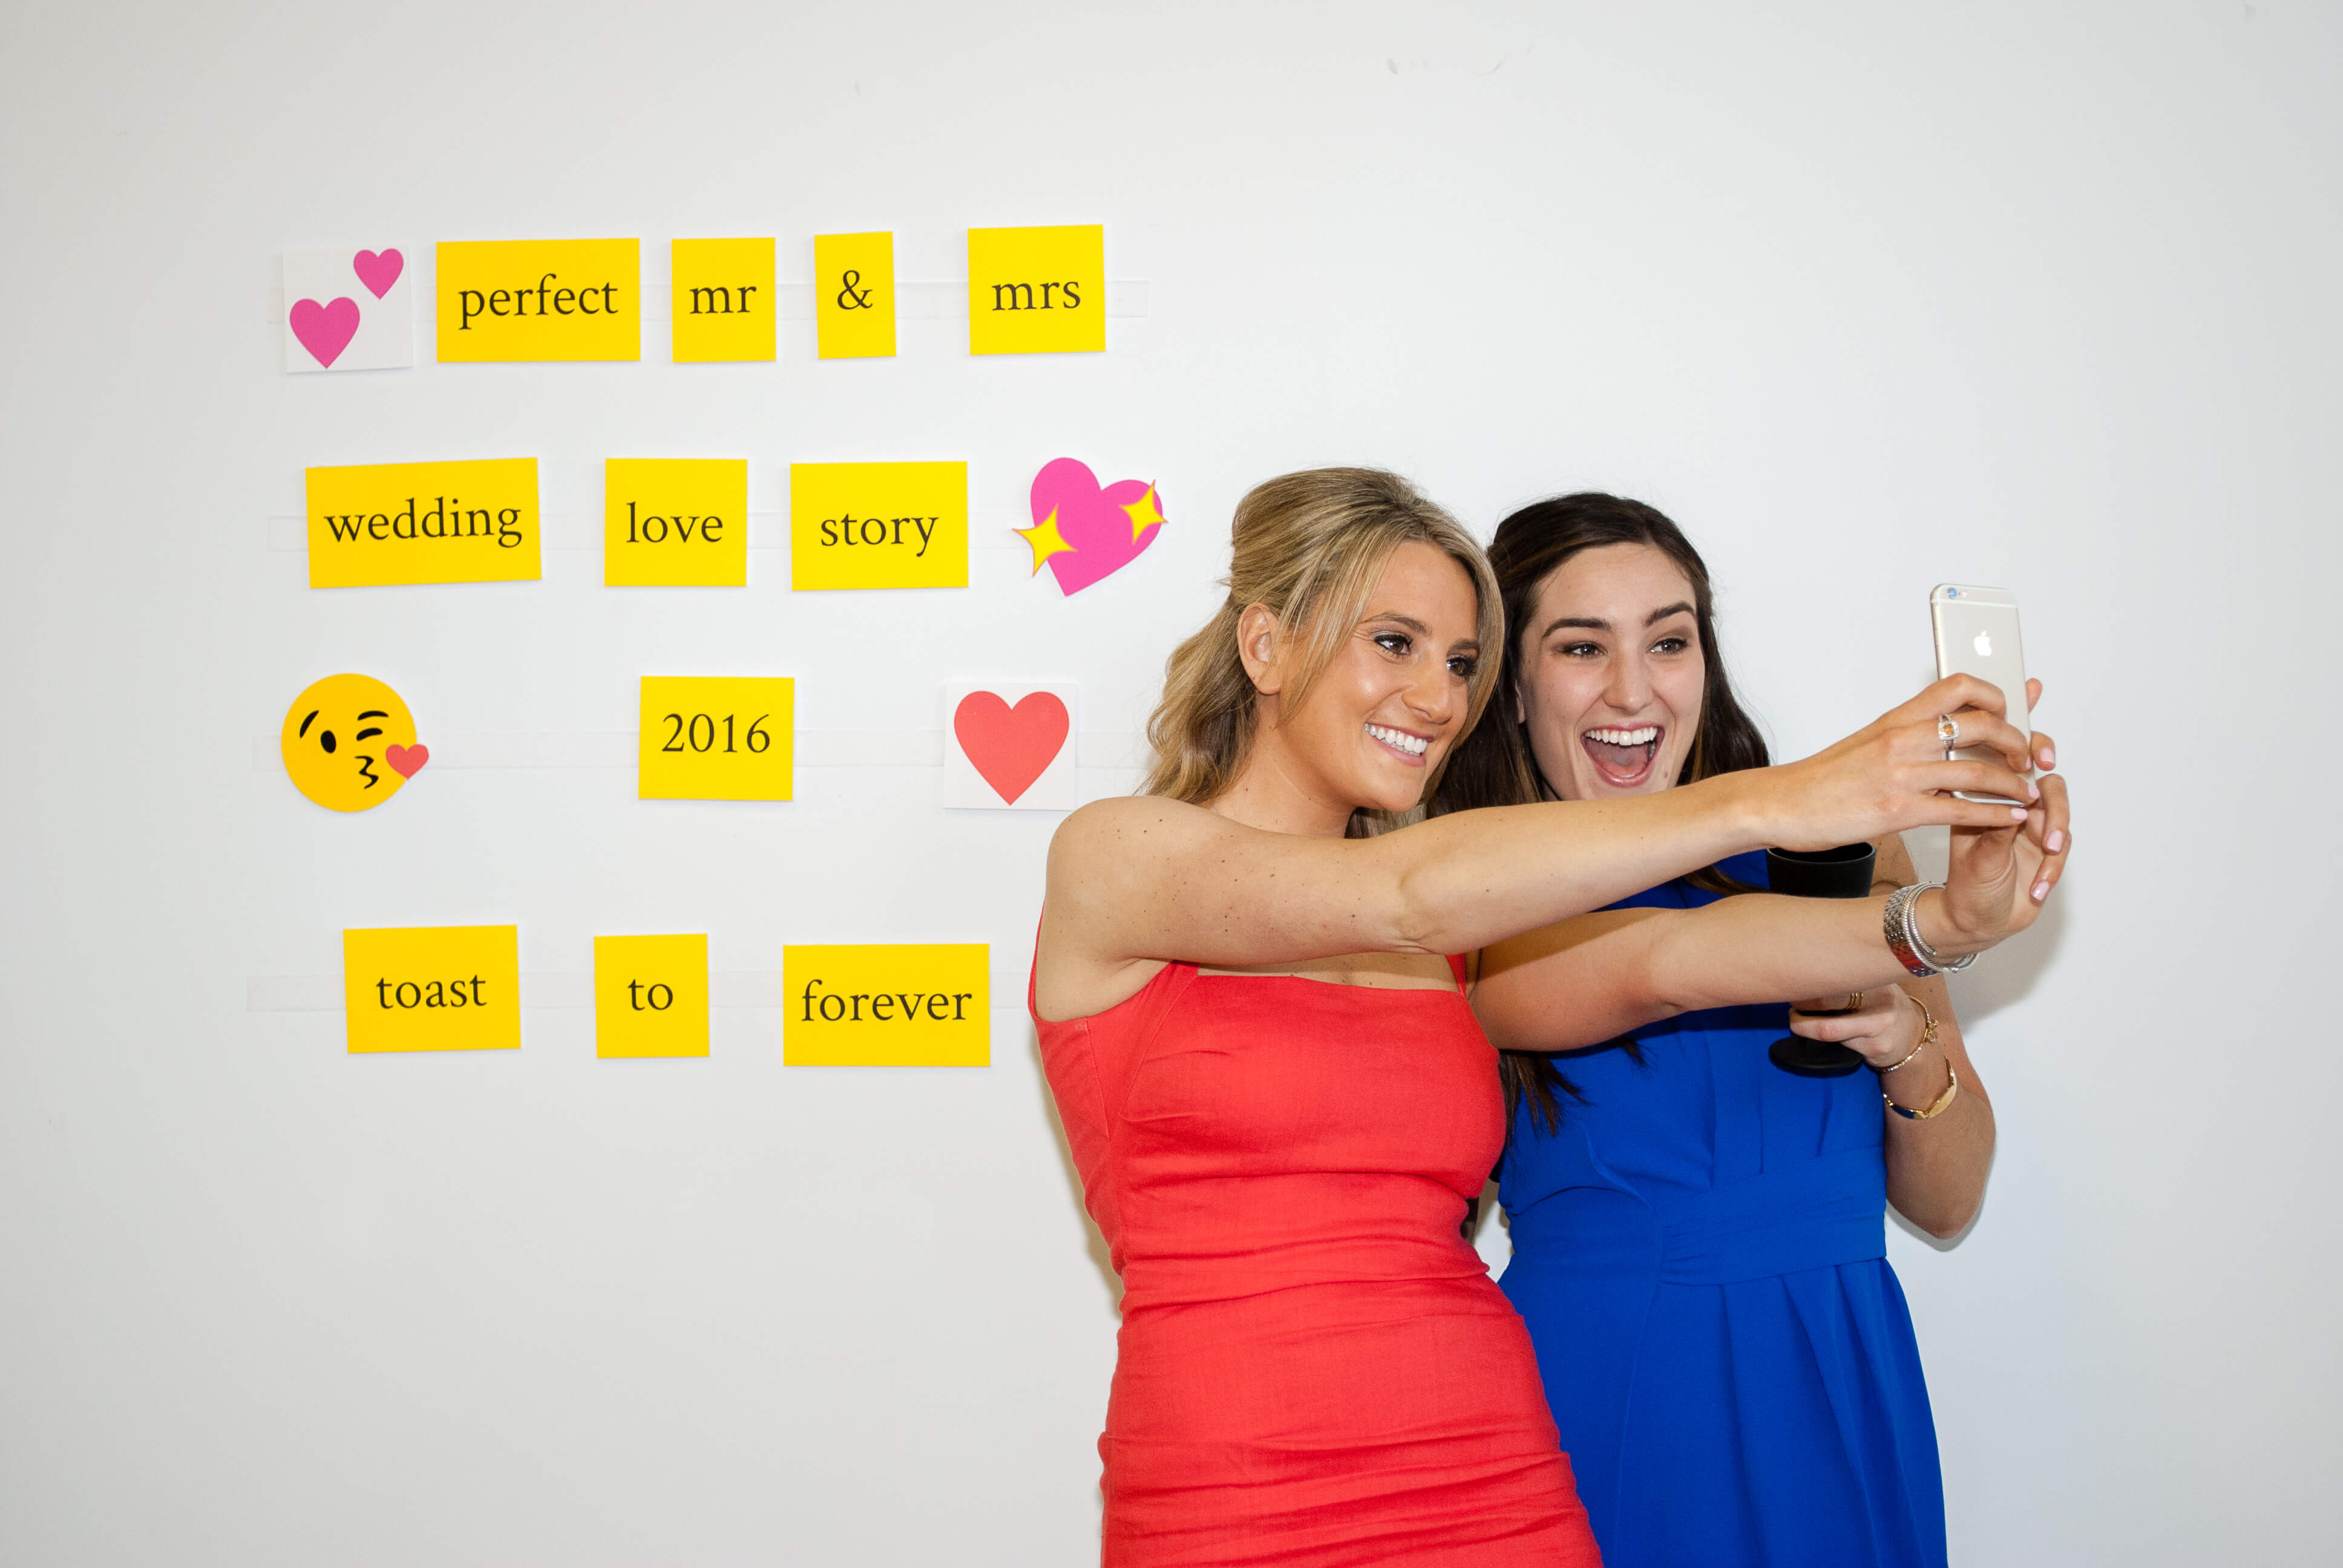 Best Wedding Wishes DIY Photo Booth Backdrop. Give wedding guests word tiles and emojis to spell their best wishes. Removes cleanly and easily from walls - no damage! What an easy and clever DIY photobooth and guest book idea! #spon